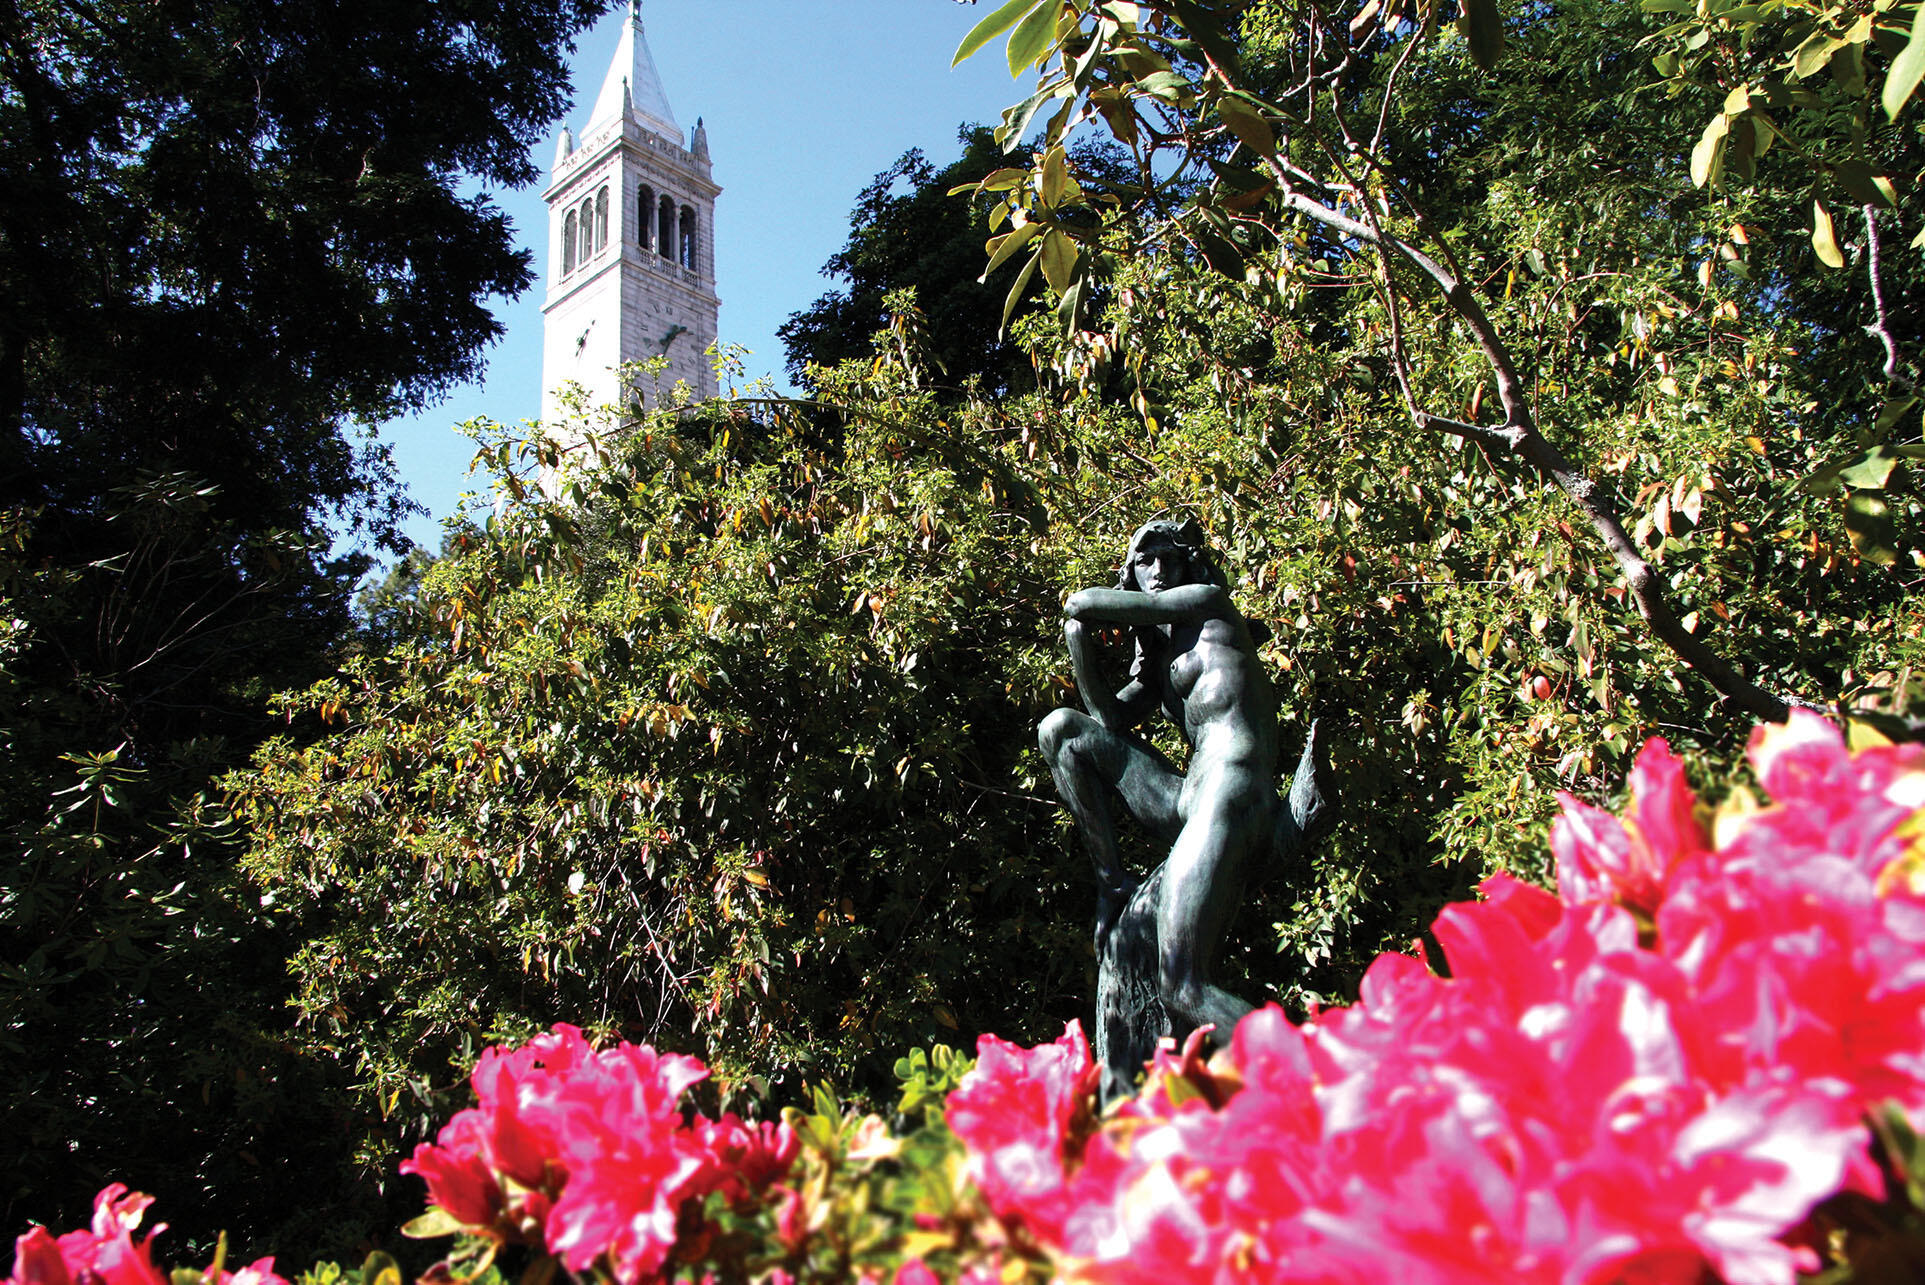 The campanile in the background of a photo of “The Last Dryad” wood nymph statue on the UC Berkeley campus. (Photo by Keegan Houser.)